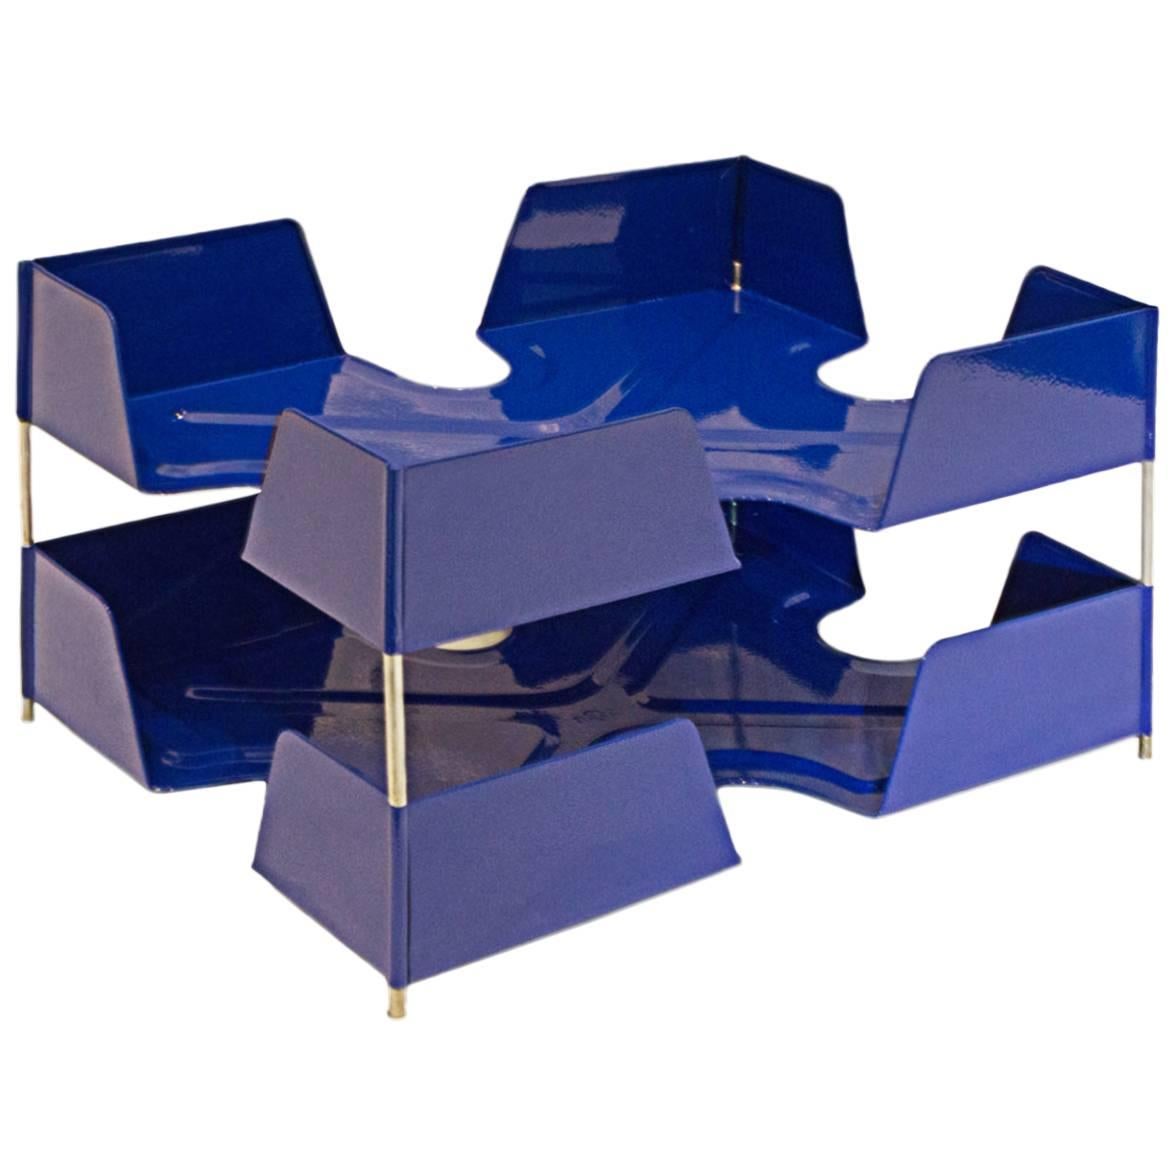 1920s Two-Tier Letter Tray, Royal Blue